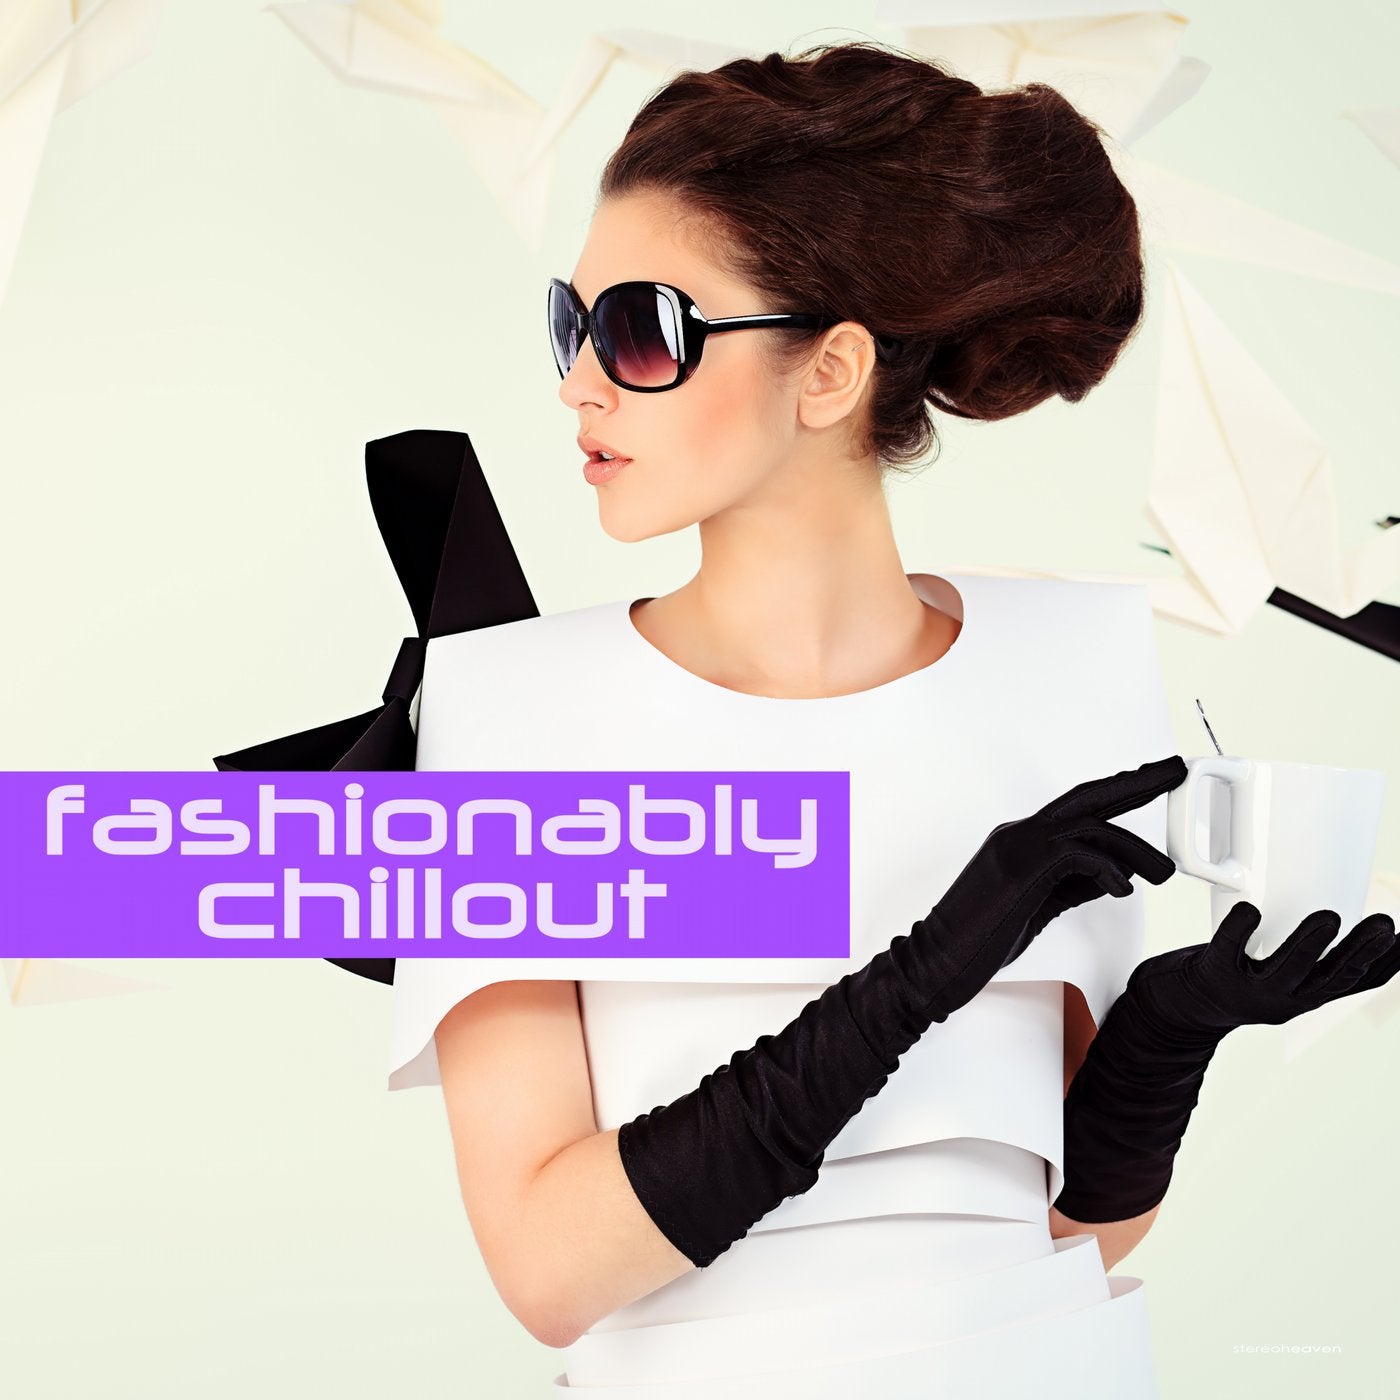 Fashionably Chillout